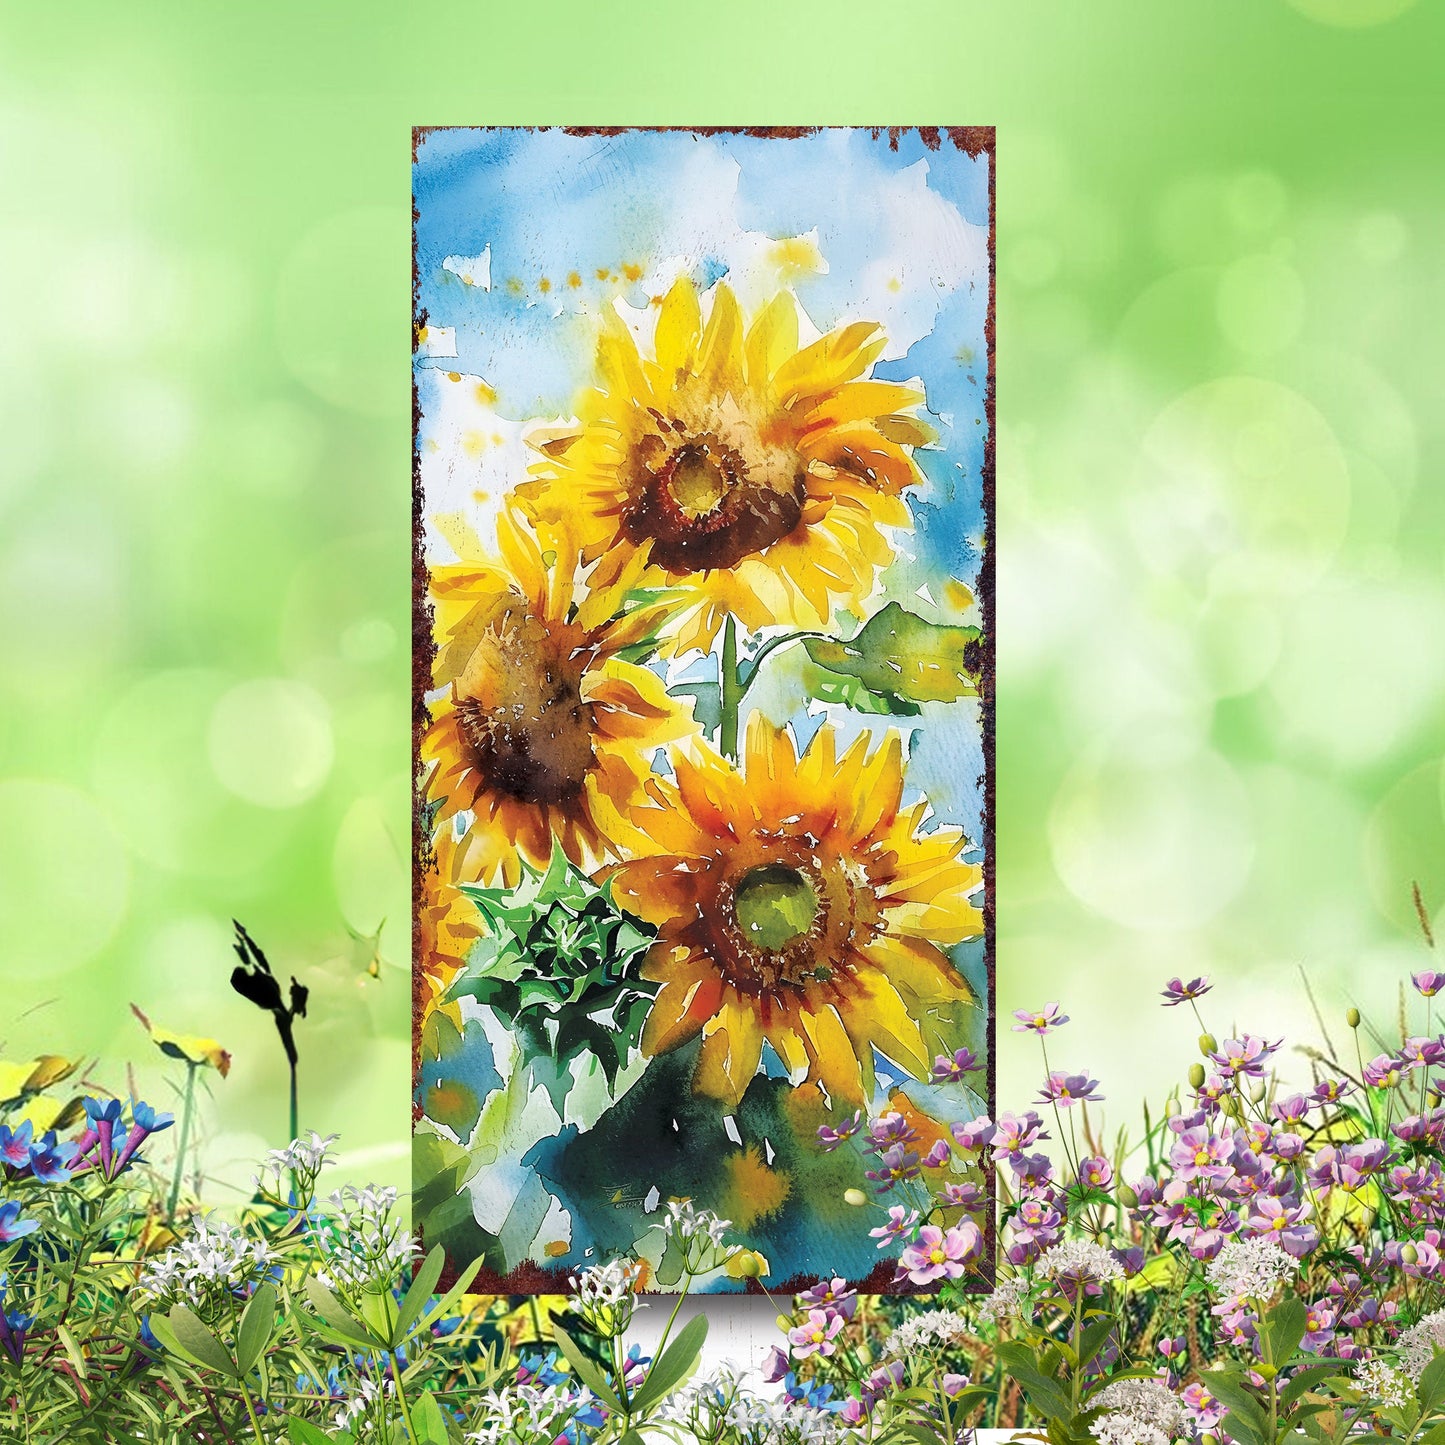 30in Summer Garden Stake | Watercolor Style Sunflowers Decor - Made in USA - Ideal for Outdoor, Yard, and Garden Decor